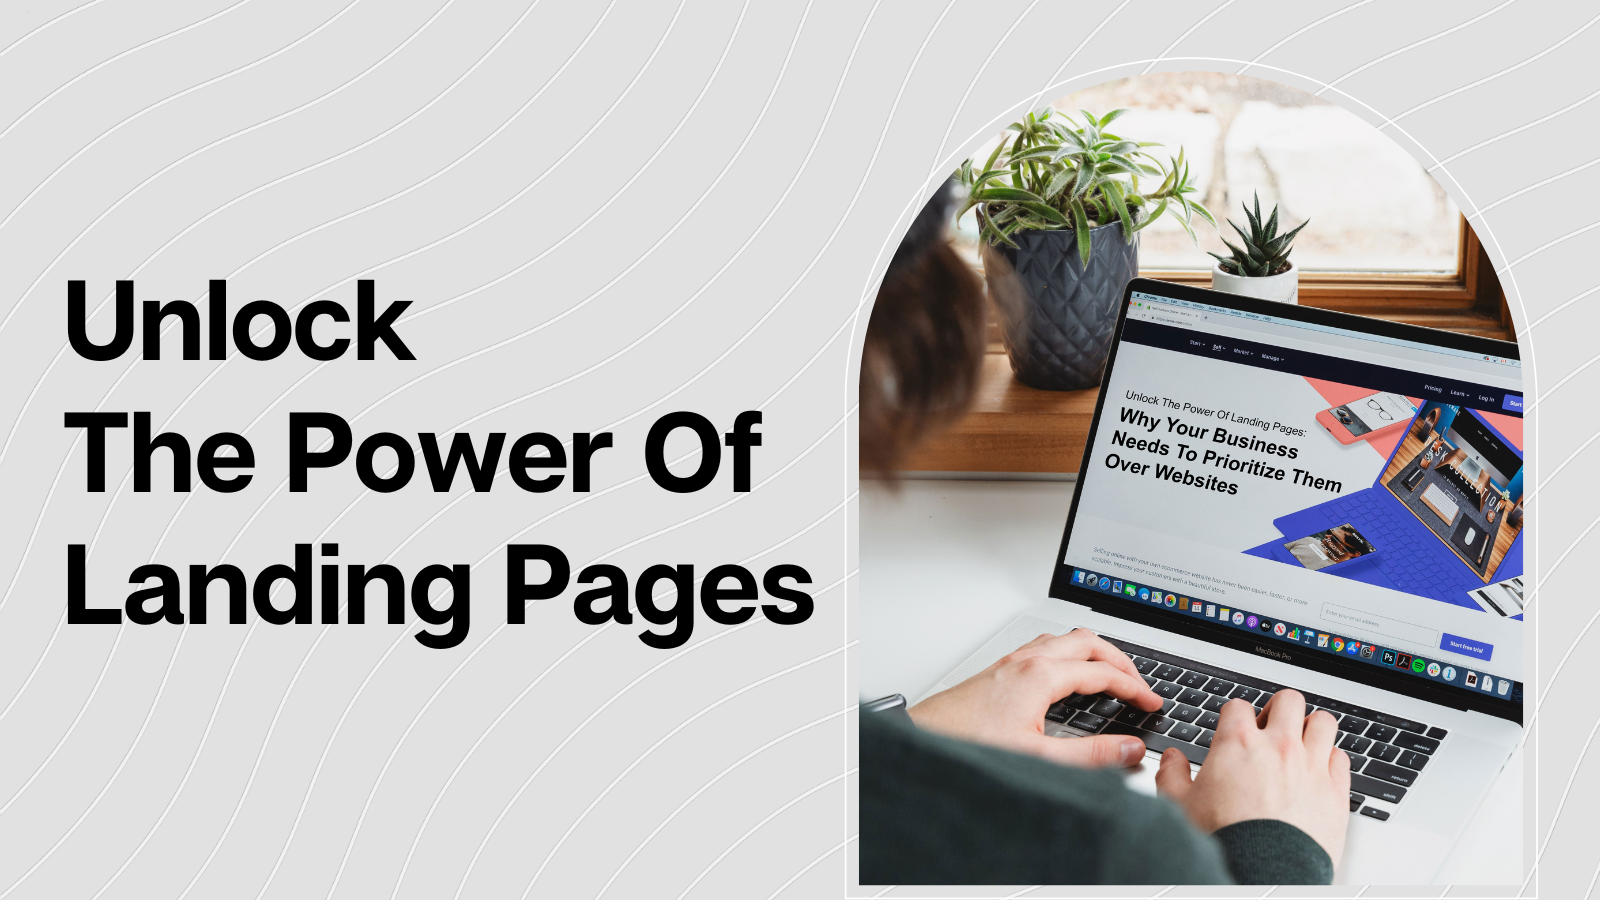 Unlock The Power Of Landing Pages: Why Your Business Needs To Prioritize Them Over Websites